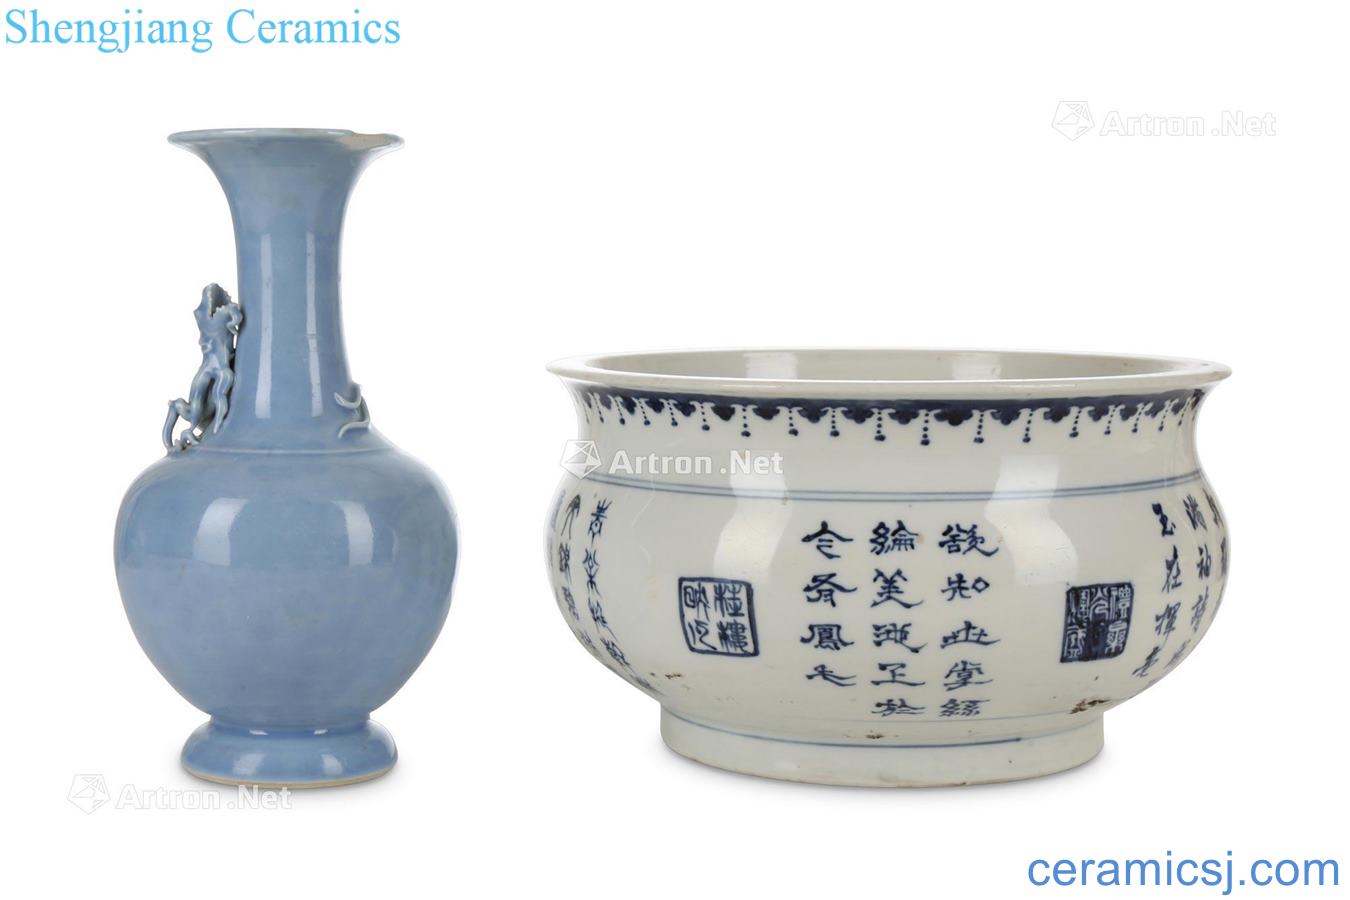 Qing dynasty blue and white incense burner and the sky blue glaze relief therefore dragon bottle